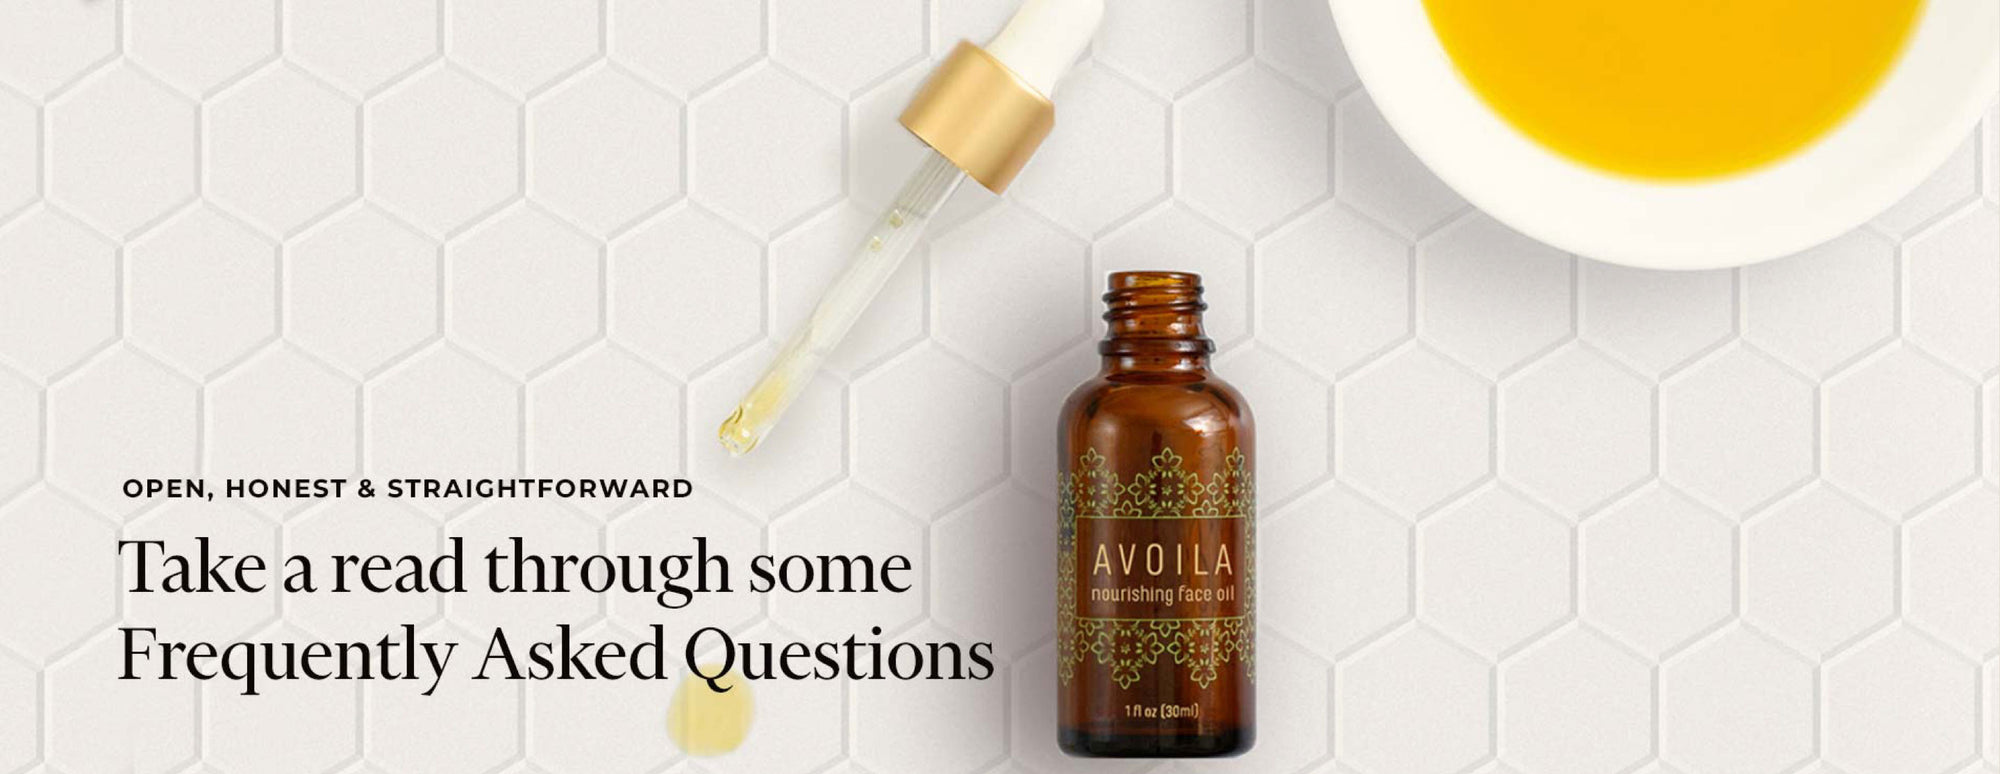 Frequently Asked Questions about Avoila Nourishing Face Oil